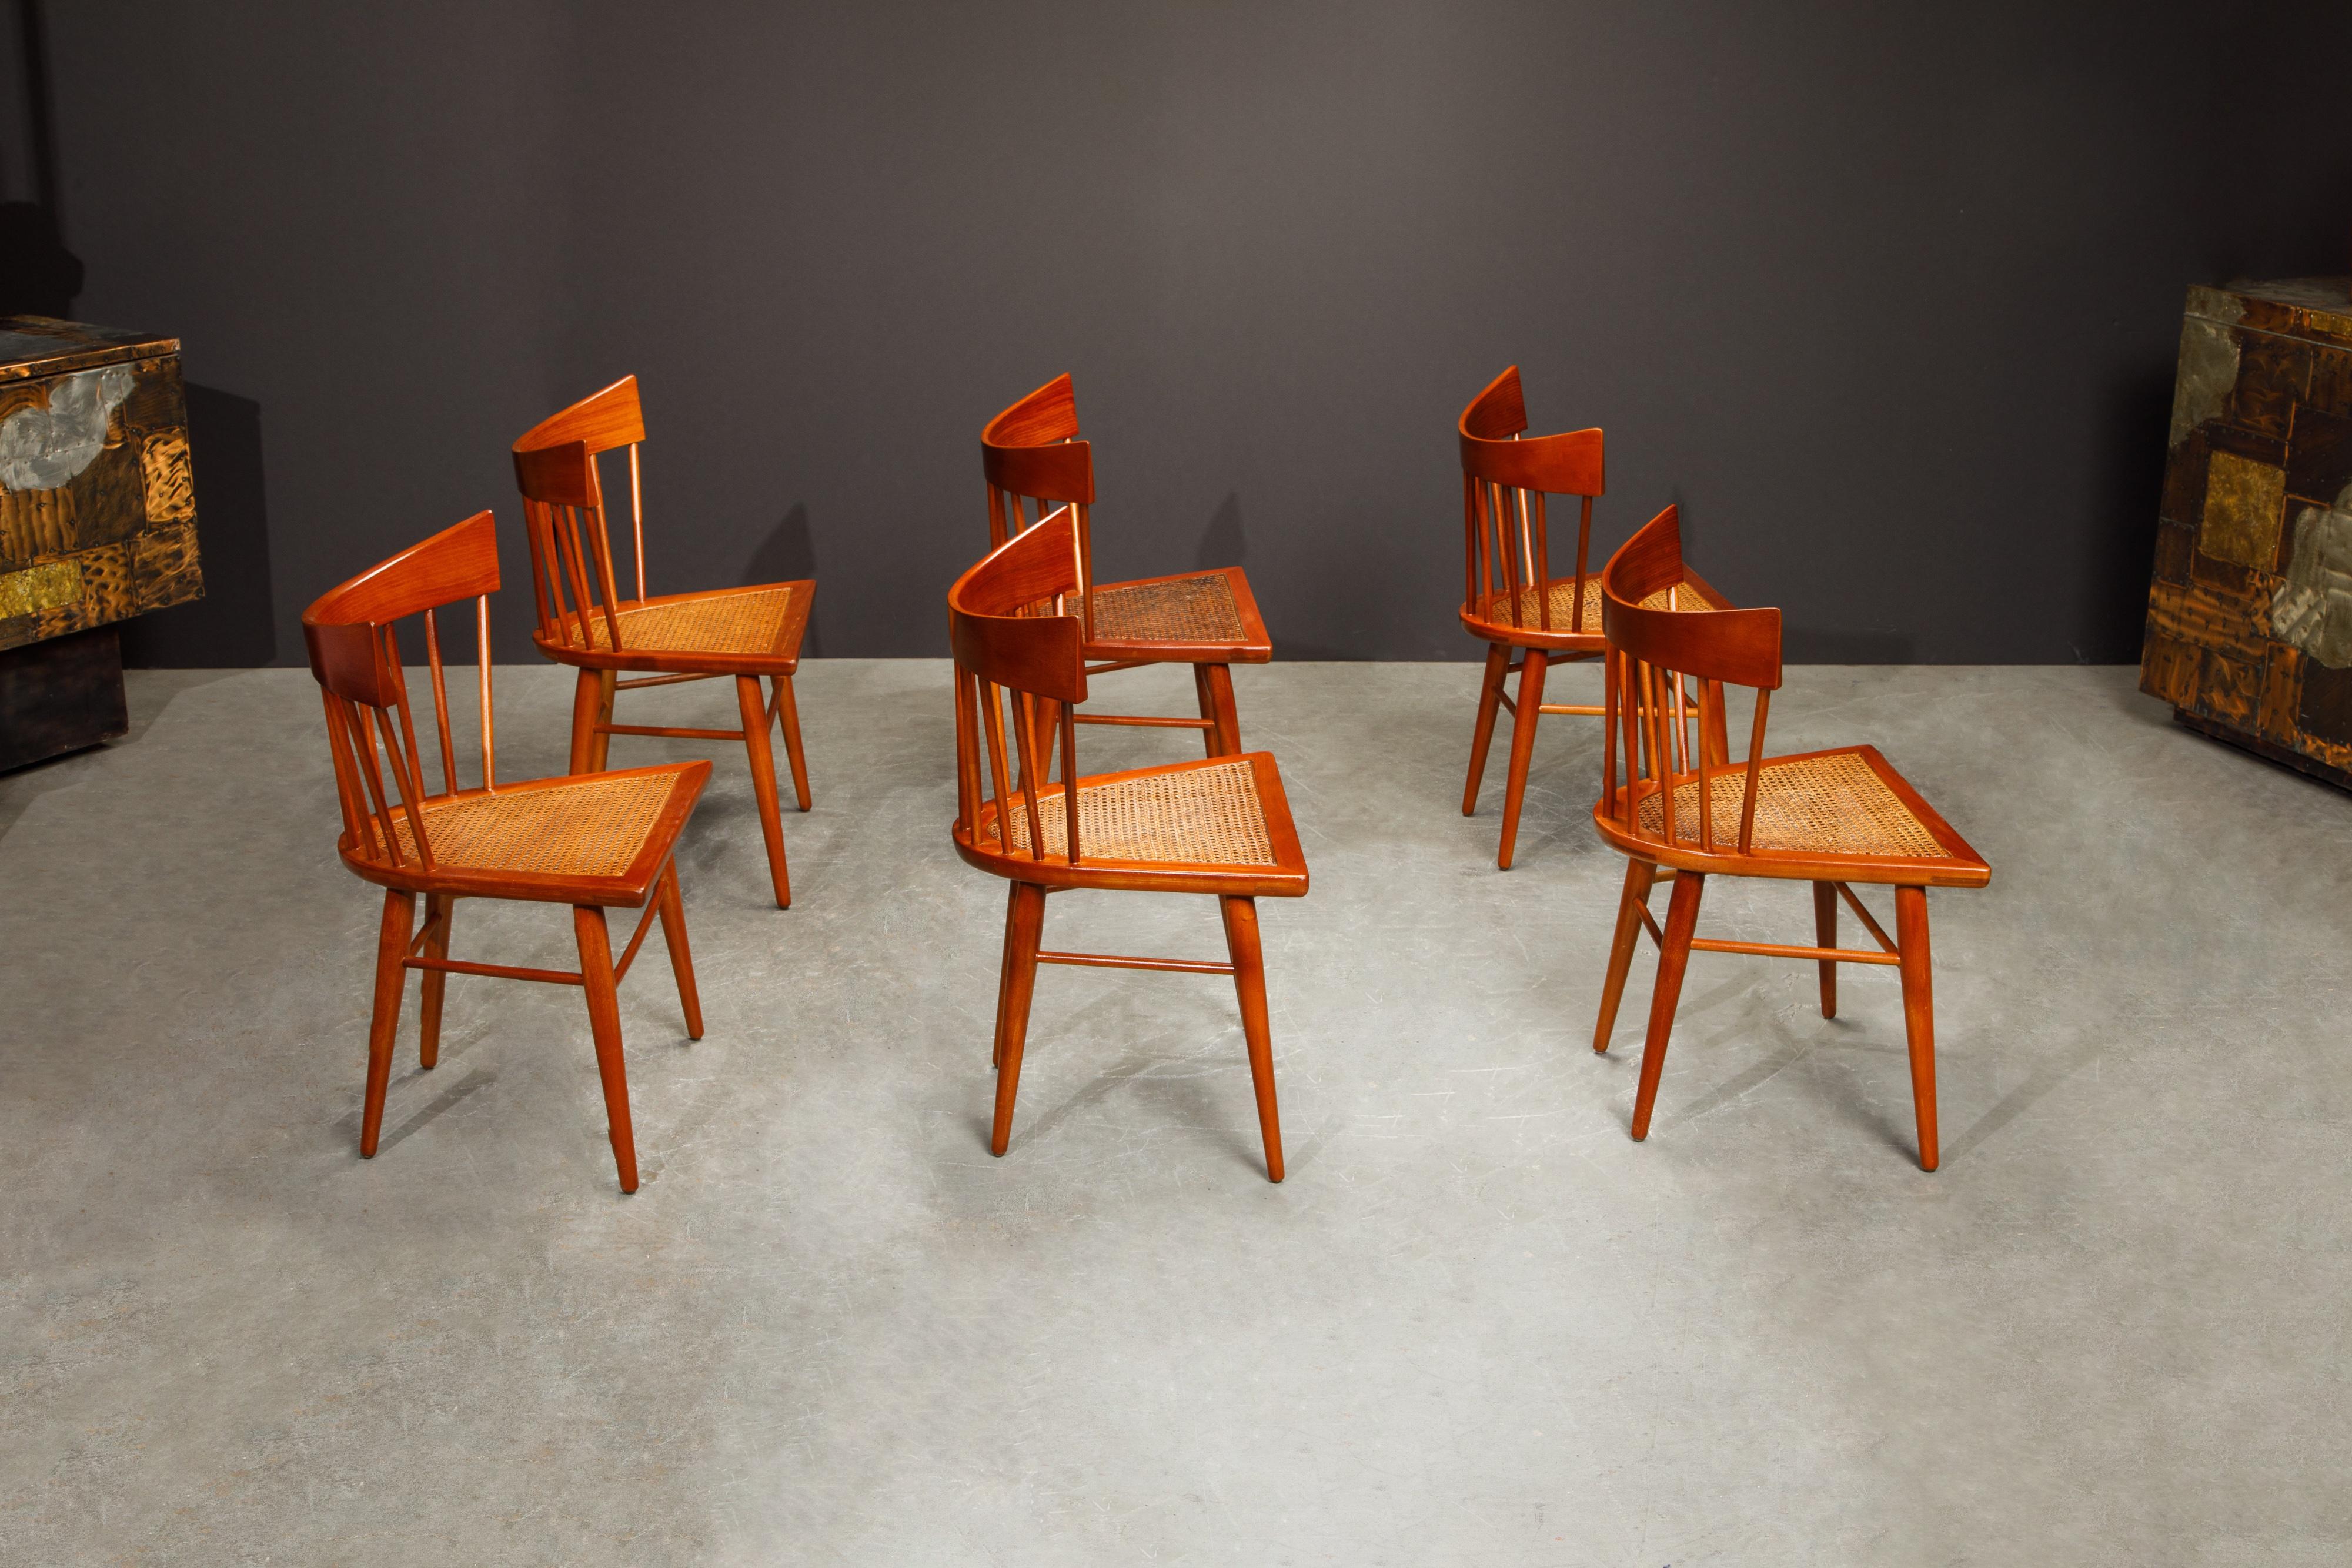 Mid-20th Century 'Yucatan' Dining Chairs by Edmond Spence for Industria Mueblera, 1960s Signed For Sale